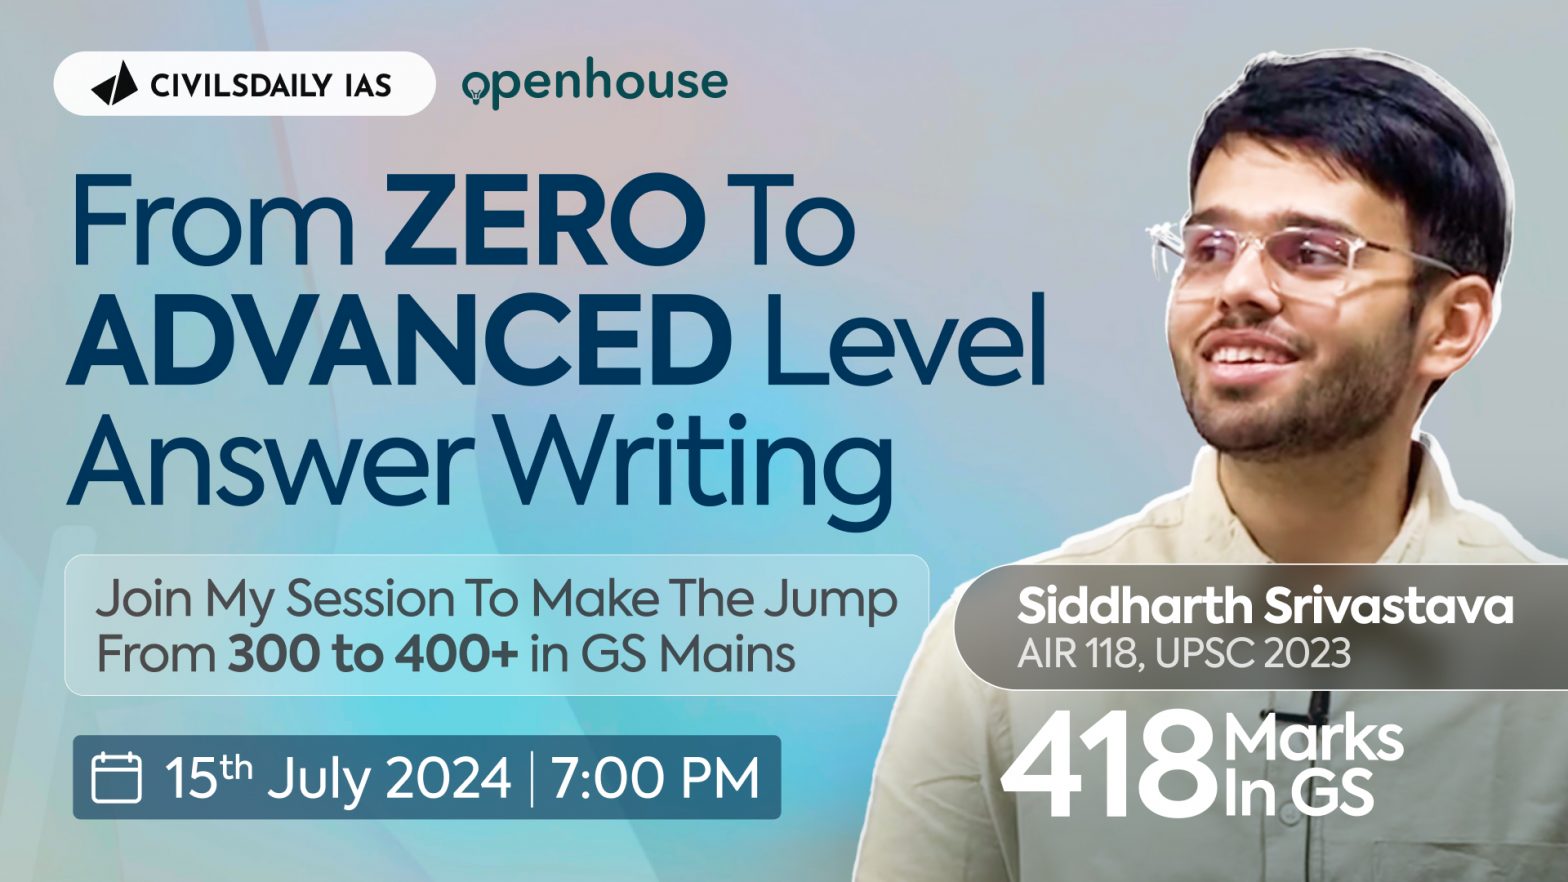 UPSC 2023, AIR 118, Siddharth Srivastava Session On From Zero To Advanced Level Answer Writing